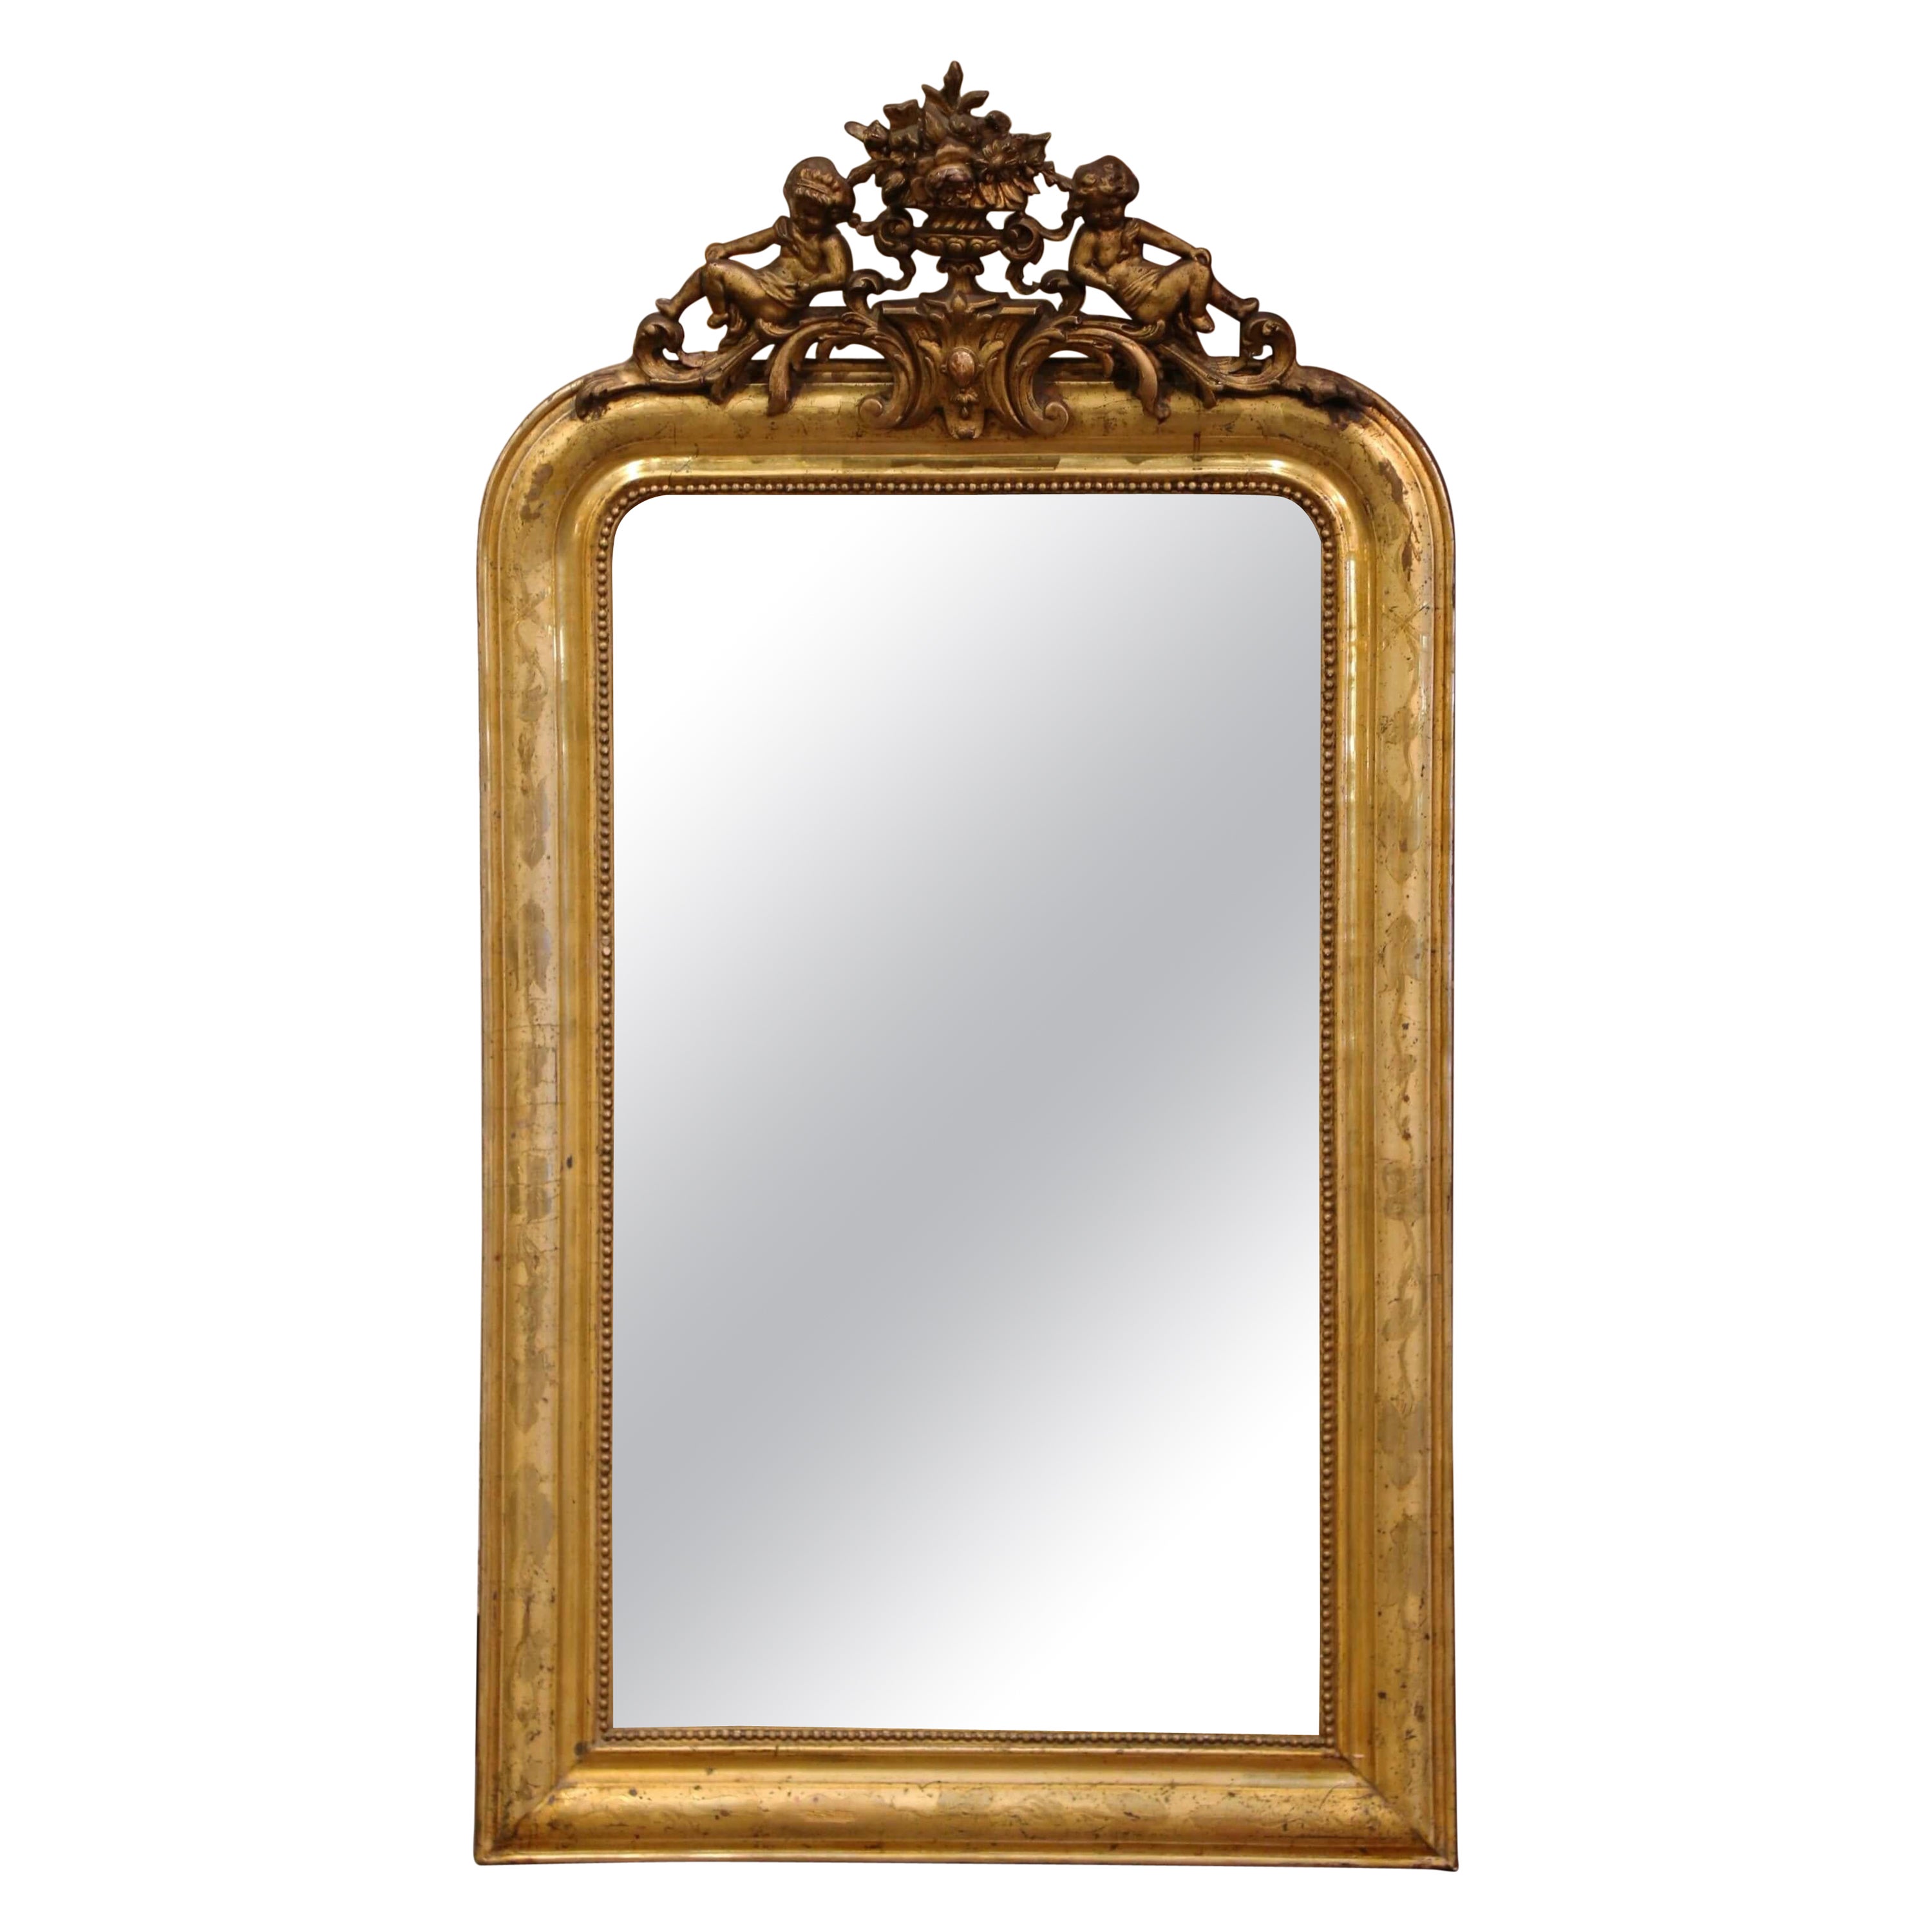 19th Century Louis Philippe Carved Giltwood Mirror with Cherub and Floral Motifs For Sale